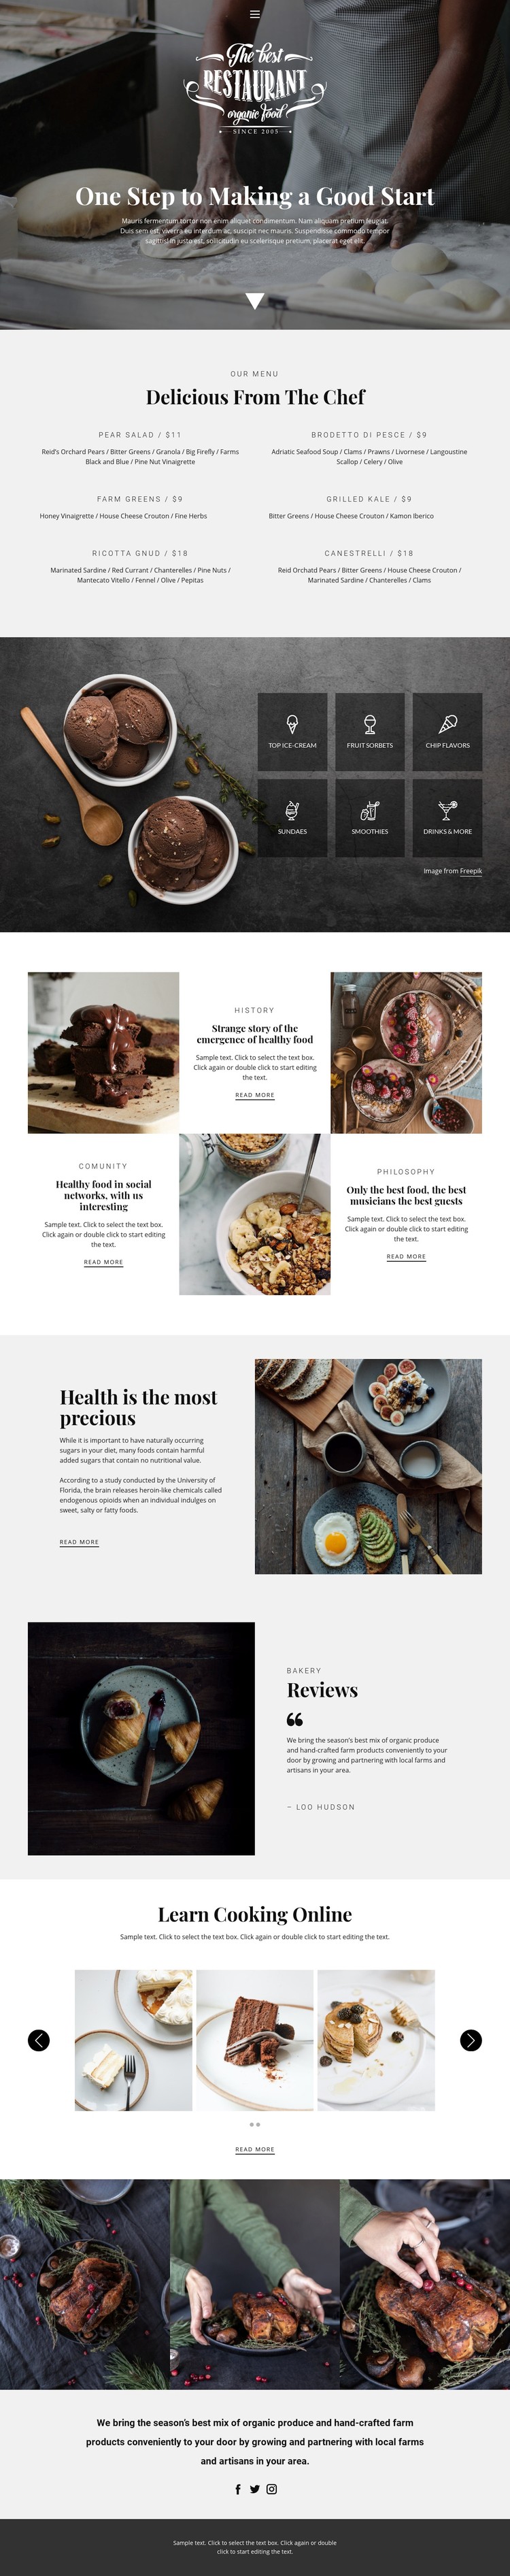 Recipes and cook lessons Webflow Template Alternative